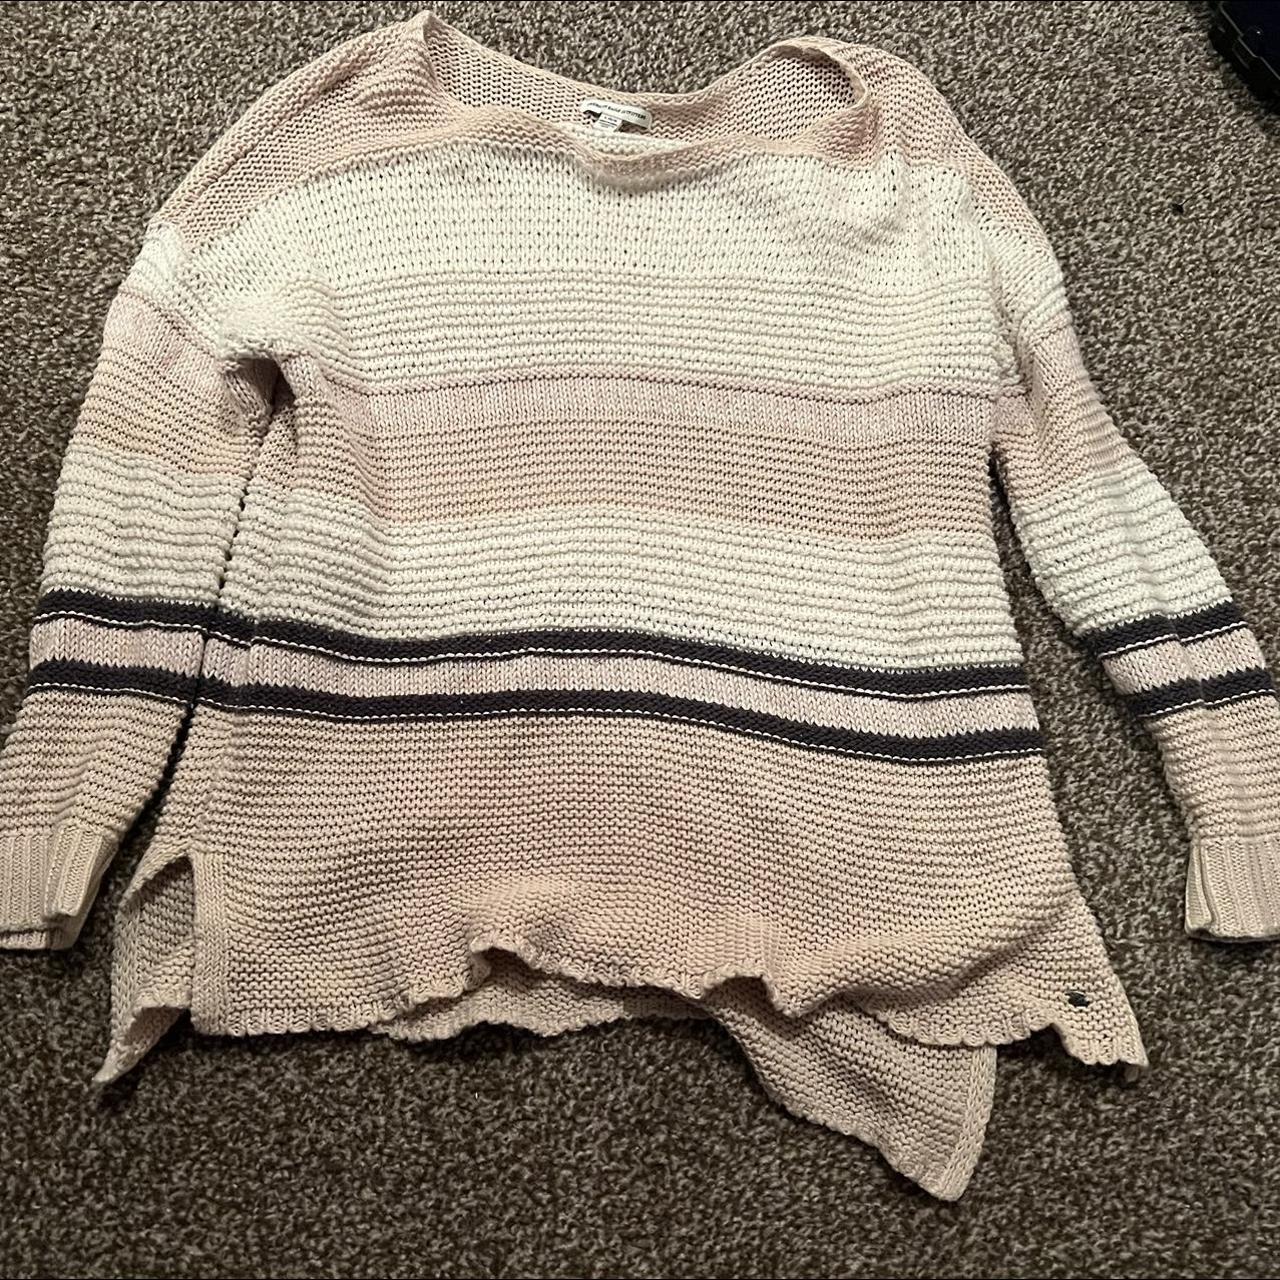 American Eagle Outfitters Women's Cream and Black Jumper | Depop